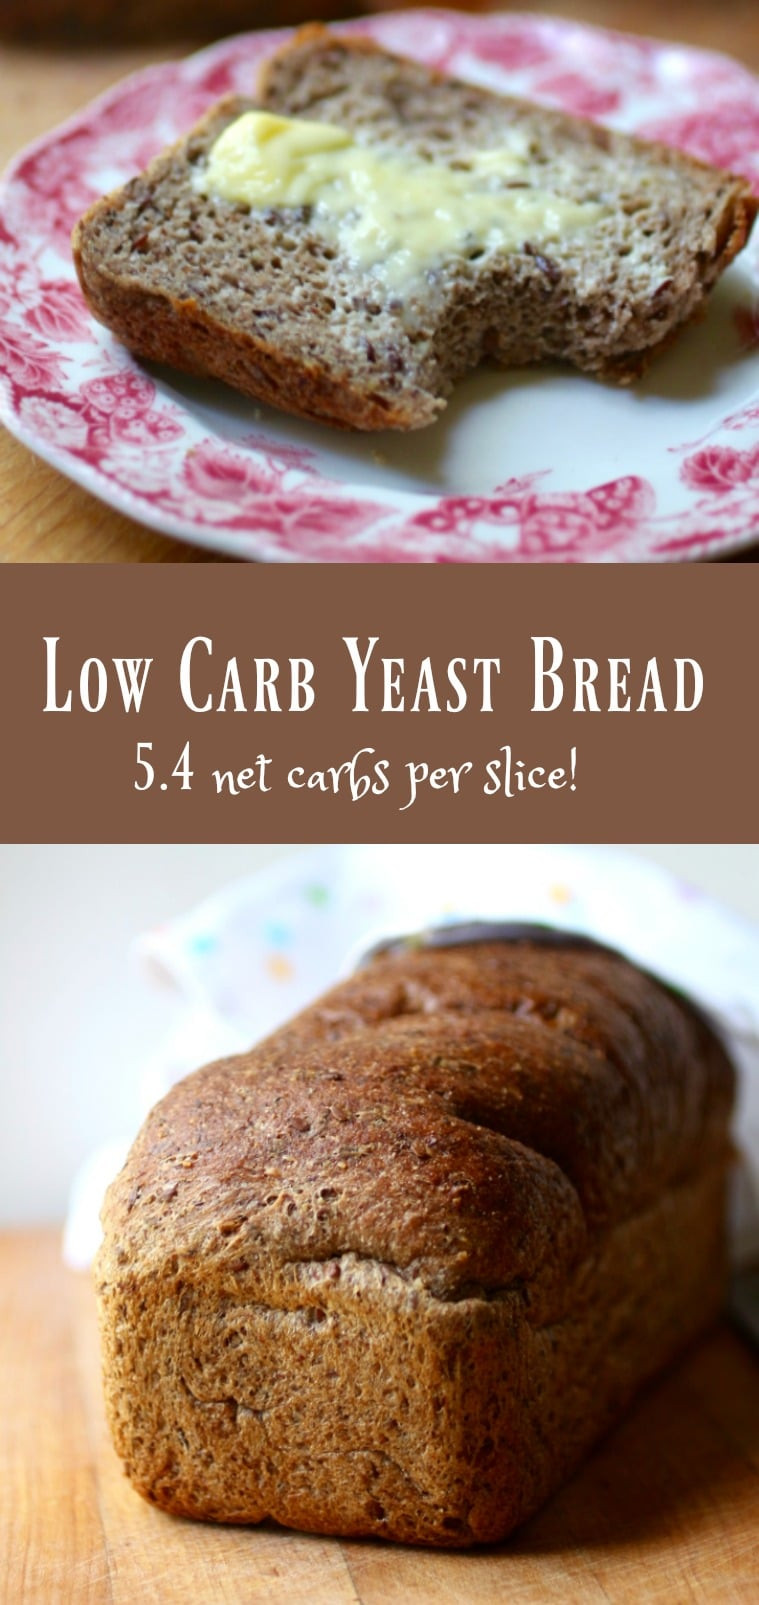 Best Low Carb Bread
 Low Carb Yeast Bread Keto Sandwich Bread lowcarb ology